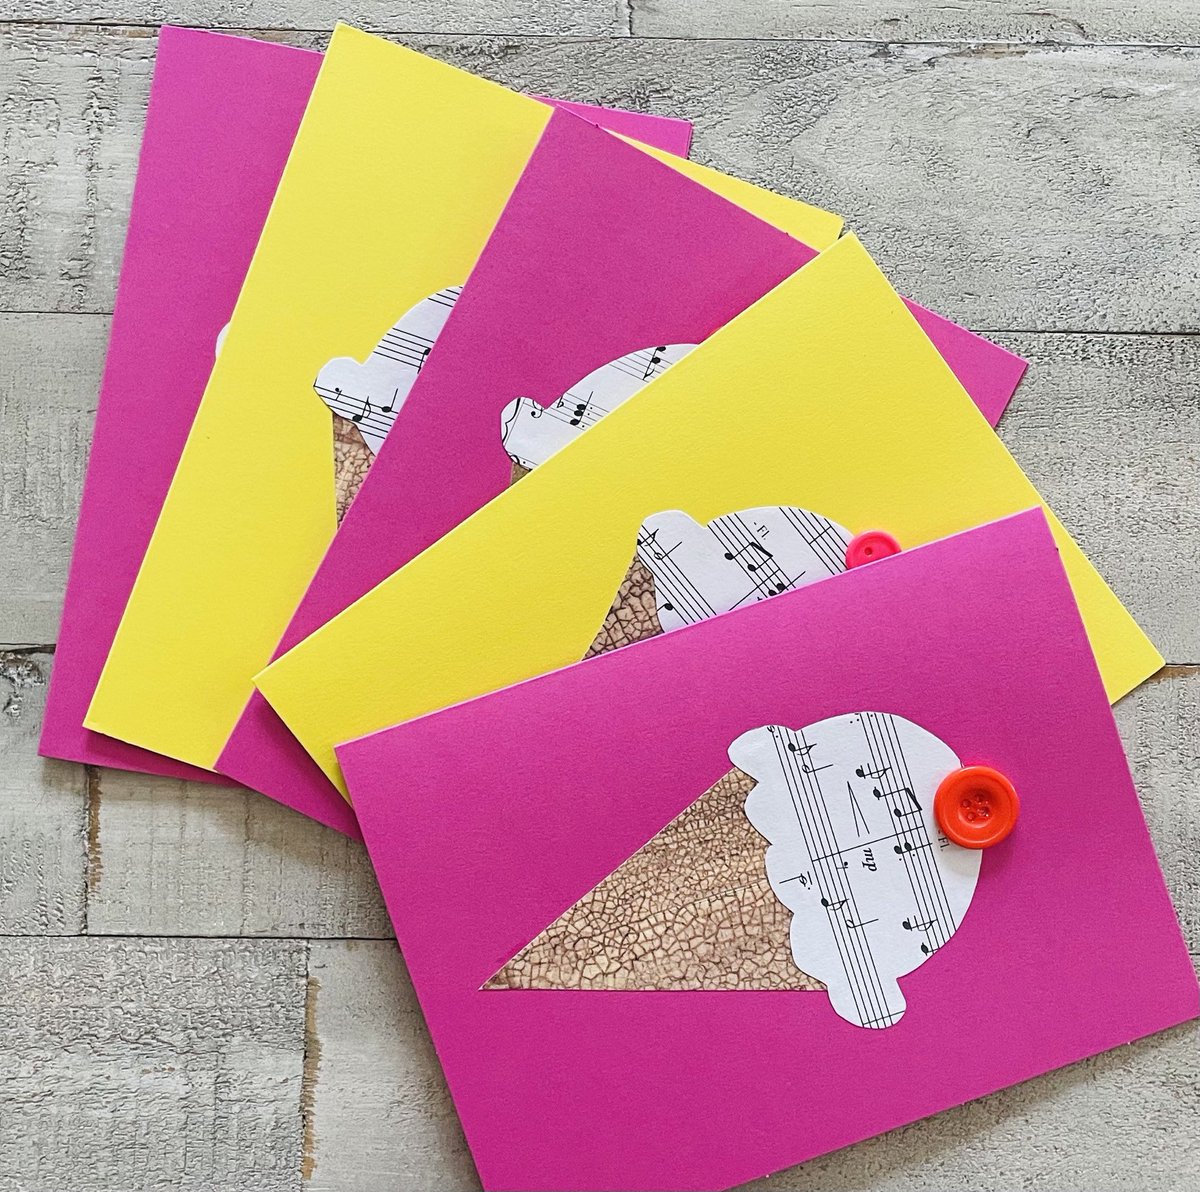 ice cream cone “note” cards for #MothersDay 

#musicmonday #musicgifts #icecream #upcycle #giftideas #etsy #mom etsy.me/41vm2hg